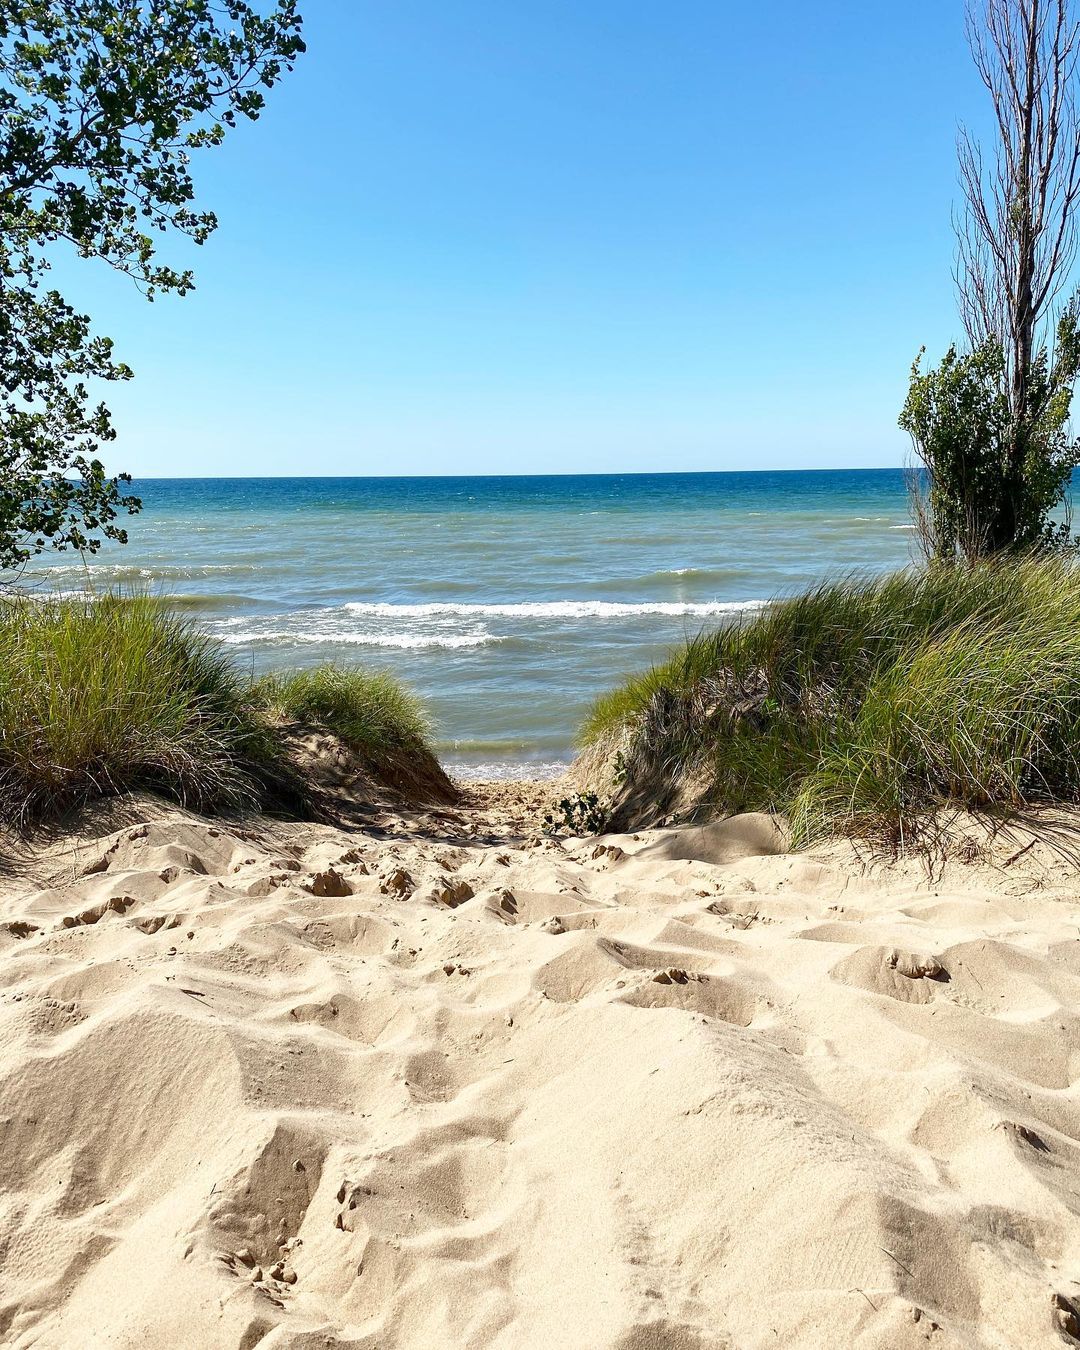 View over Oval Beach in Michigan. Photo by Instagram user @katpixels